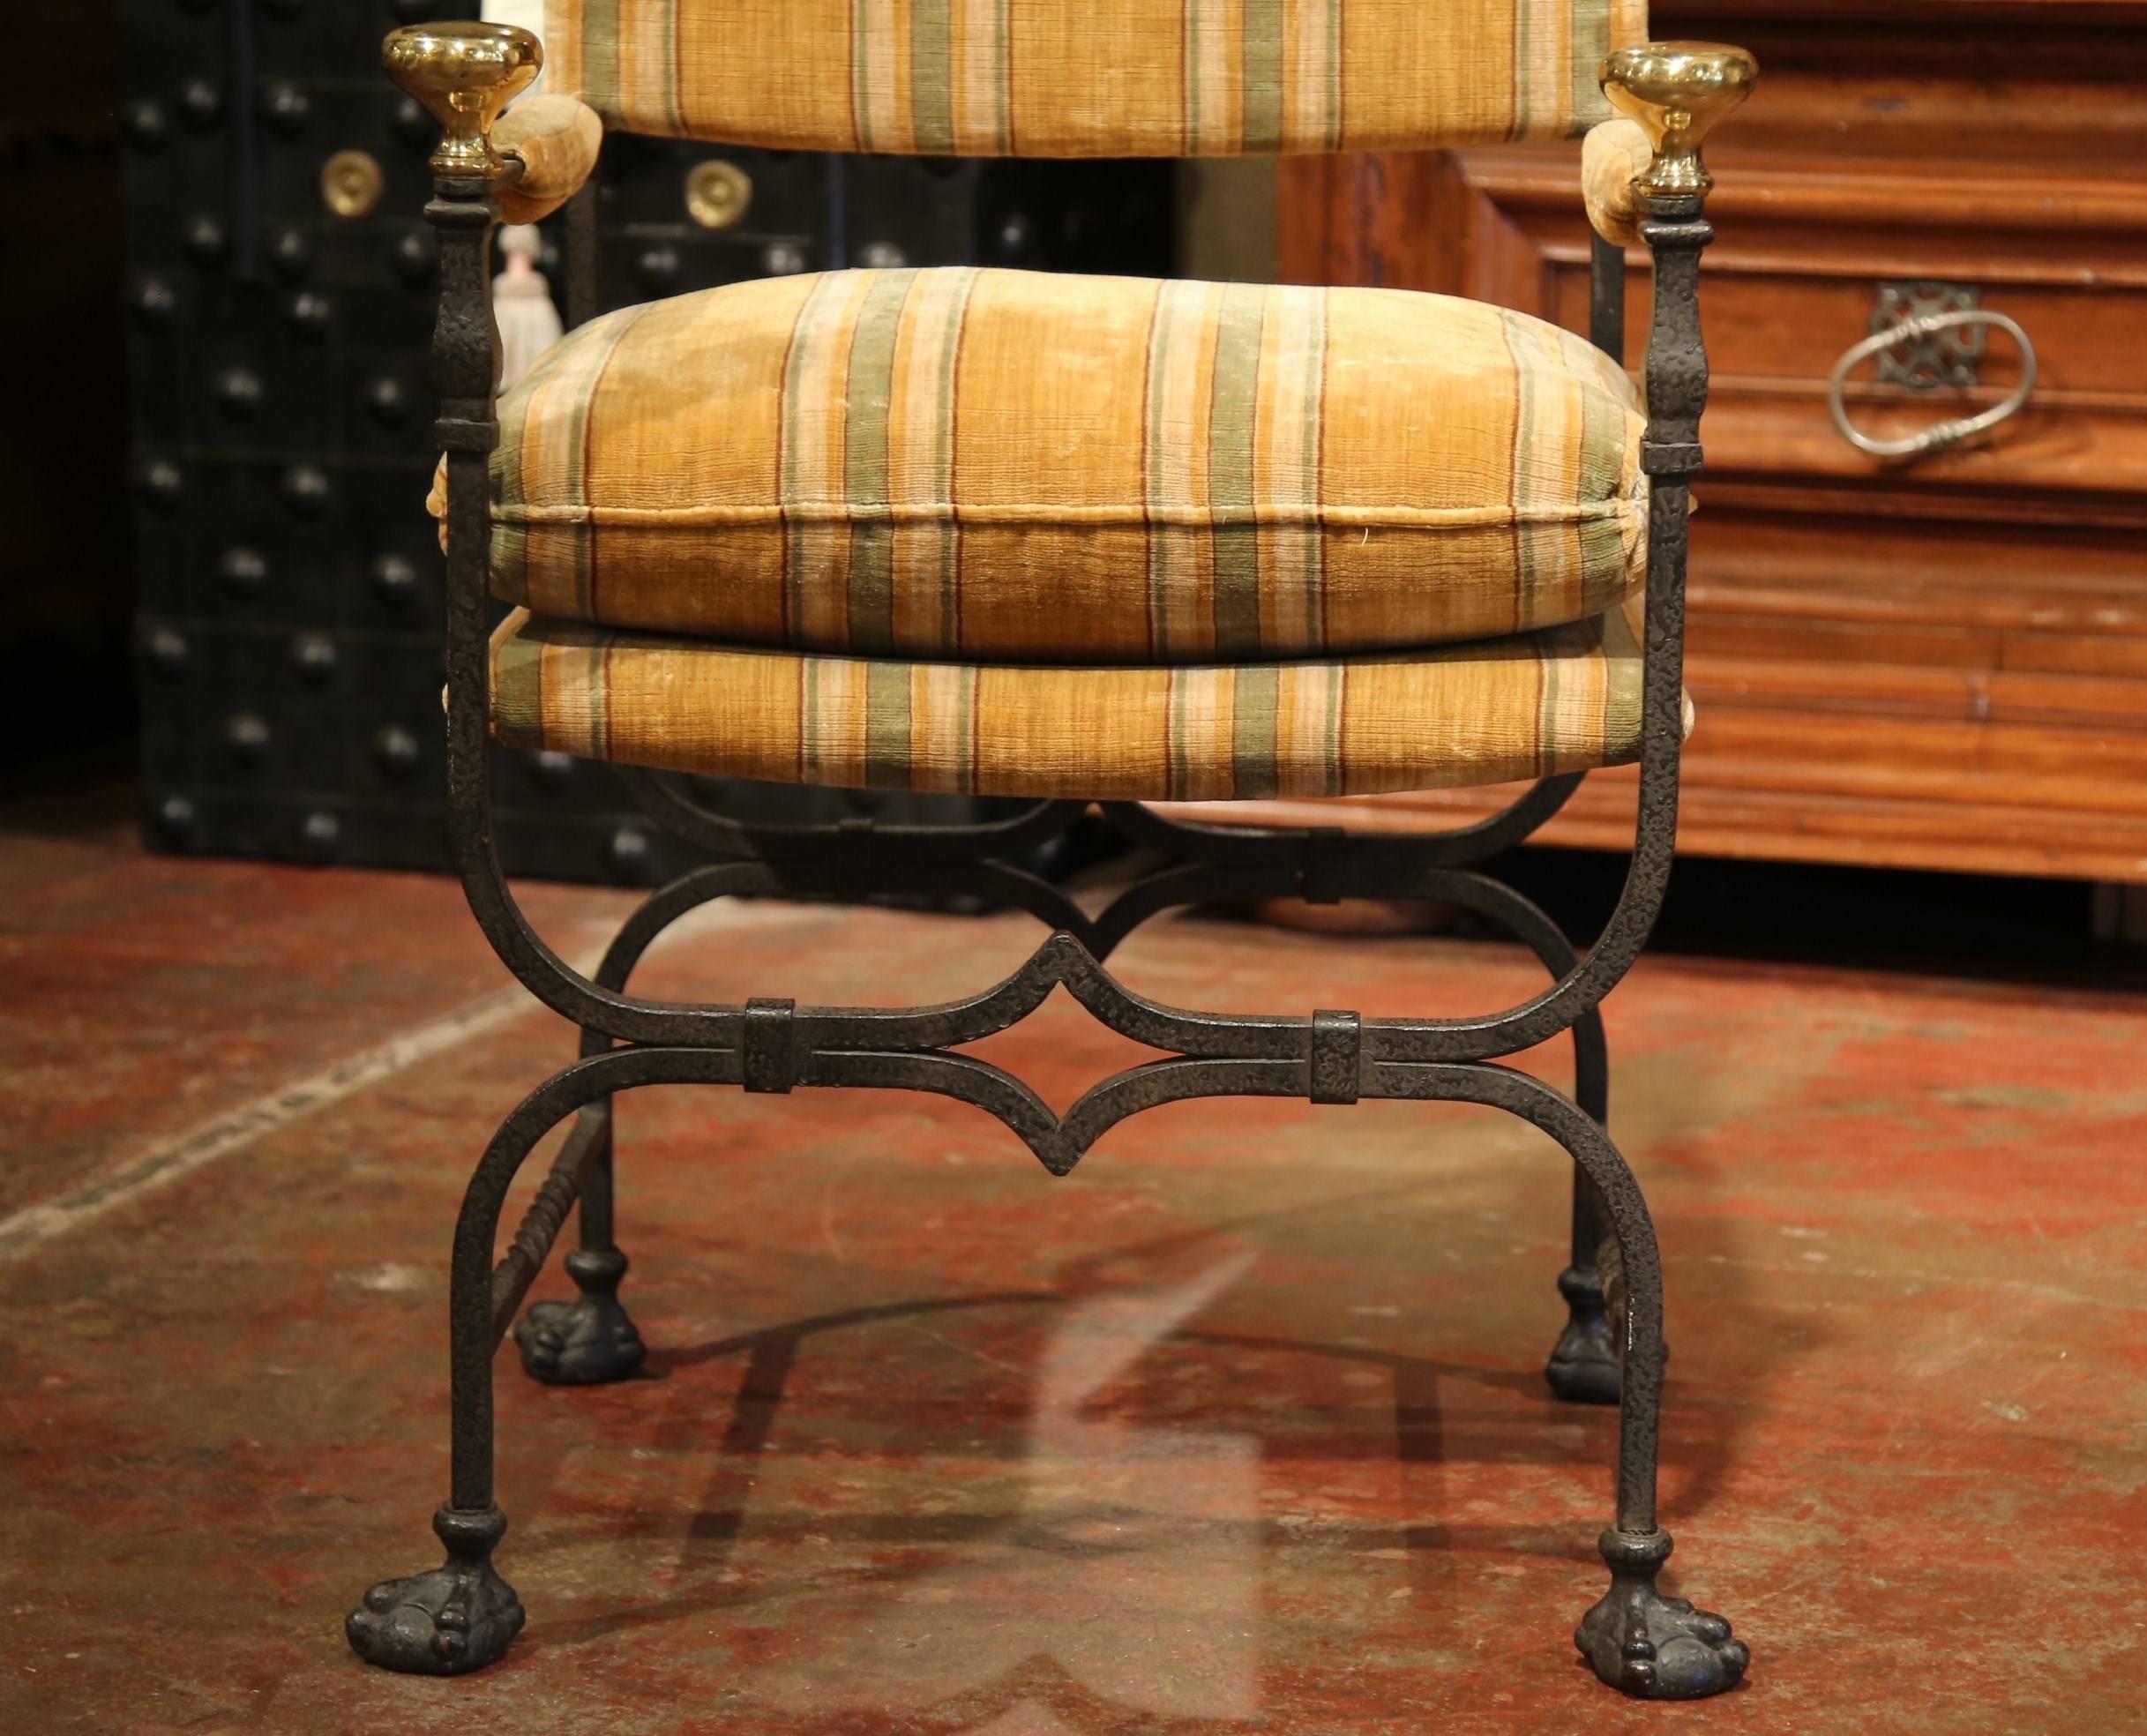 This elegant, antique Campaign armchair was created in Italy, circa 1880. The frame of the chair is formed from forged iron. The piece has scrolled legs, bronze rosette finials, and the seat is upholstered with a striped gold velvet fabric.